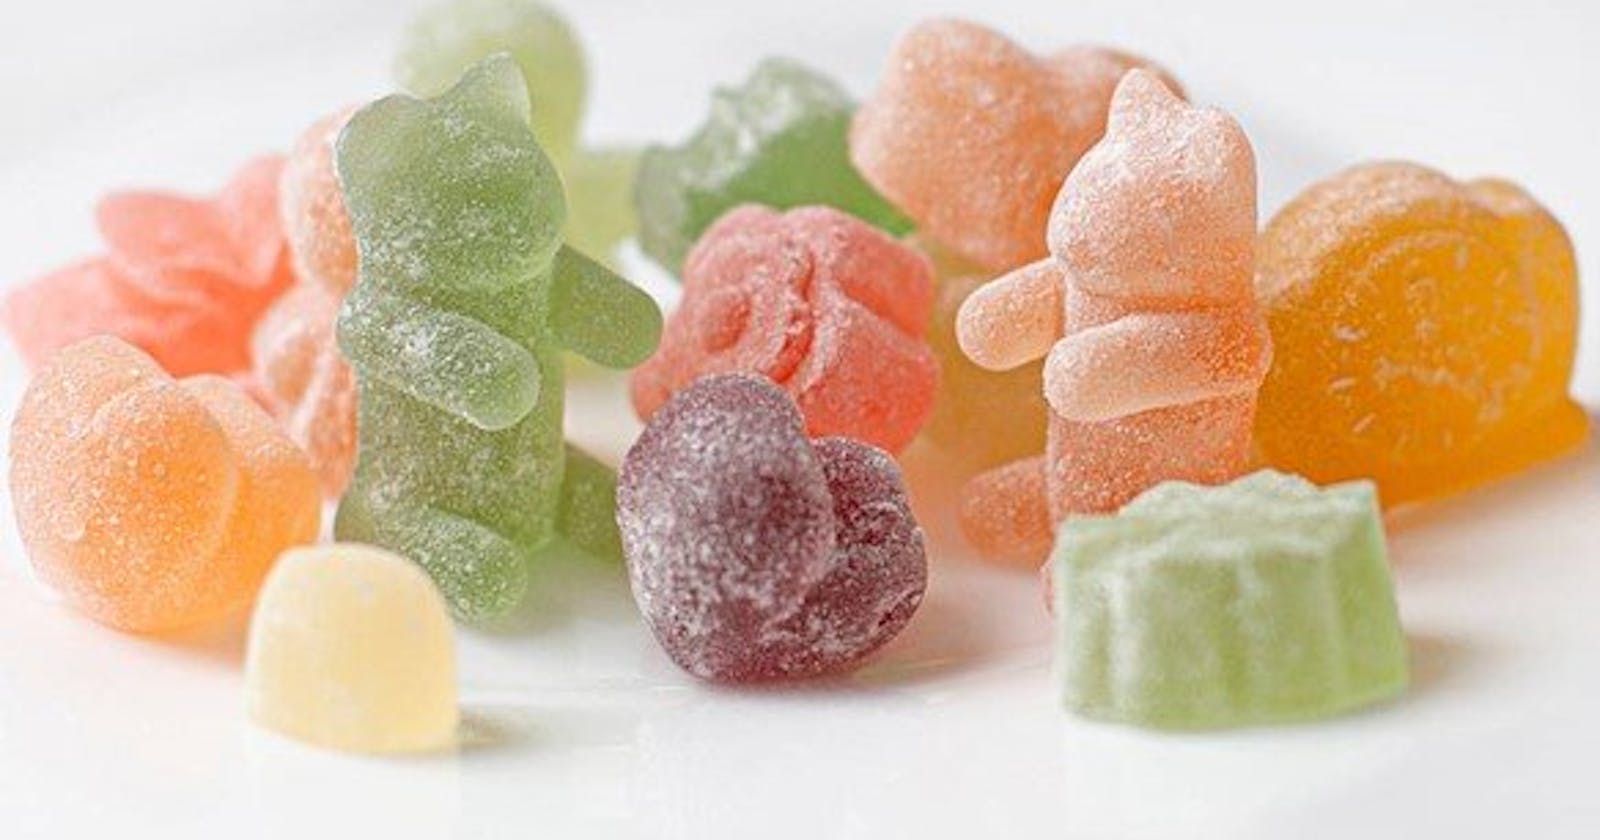 Canna Bitz CBD Gummies Benefits: Full Guide And Best Products Official Website